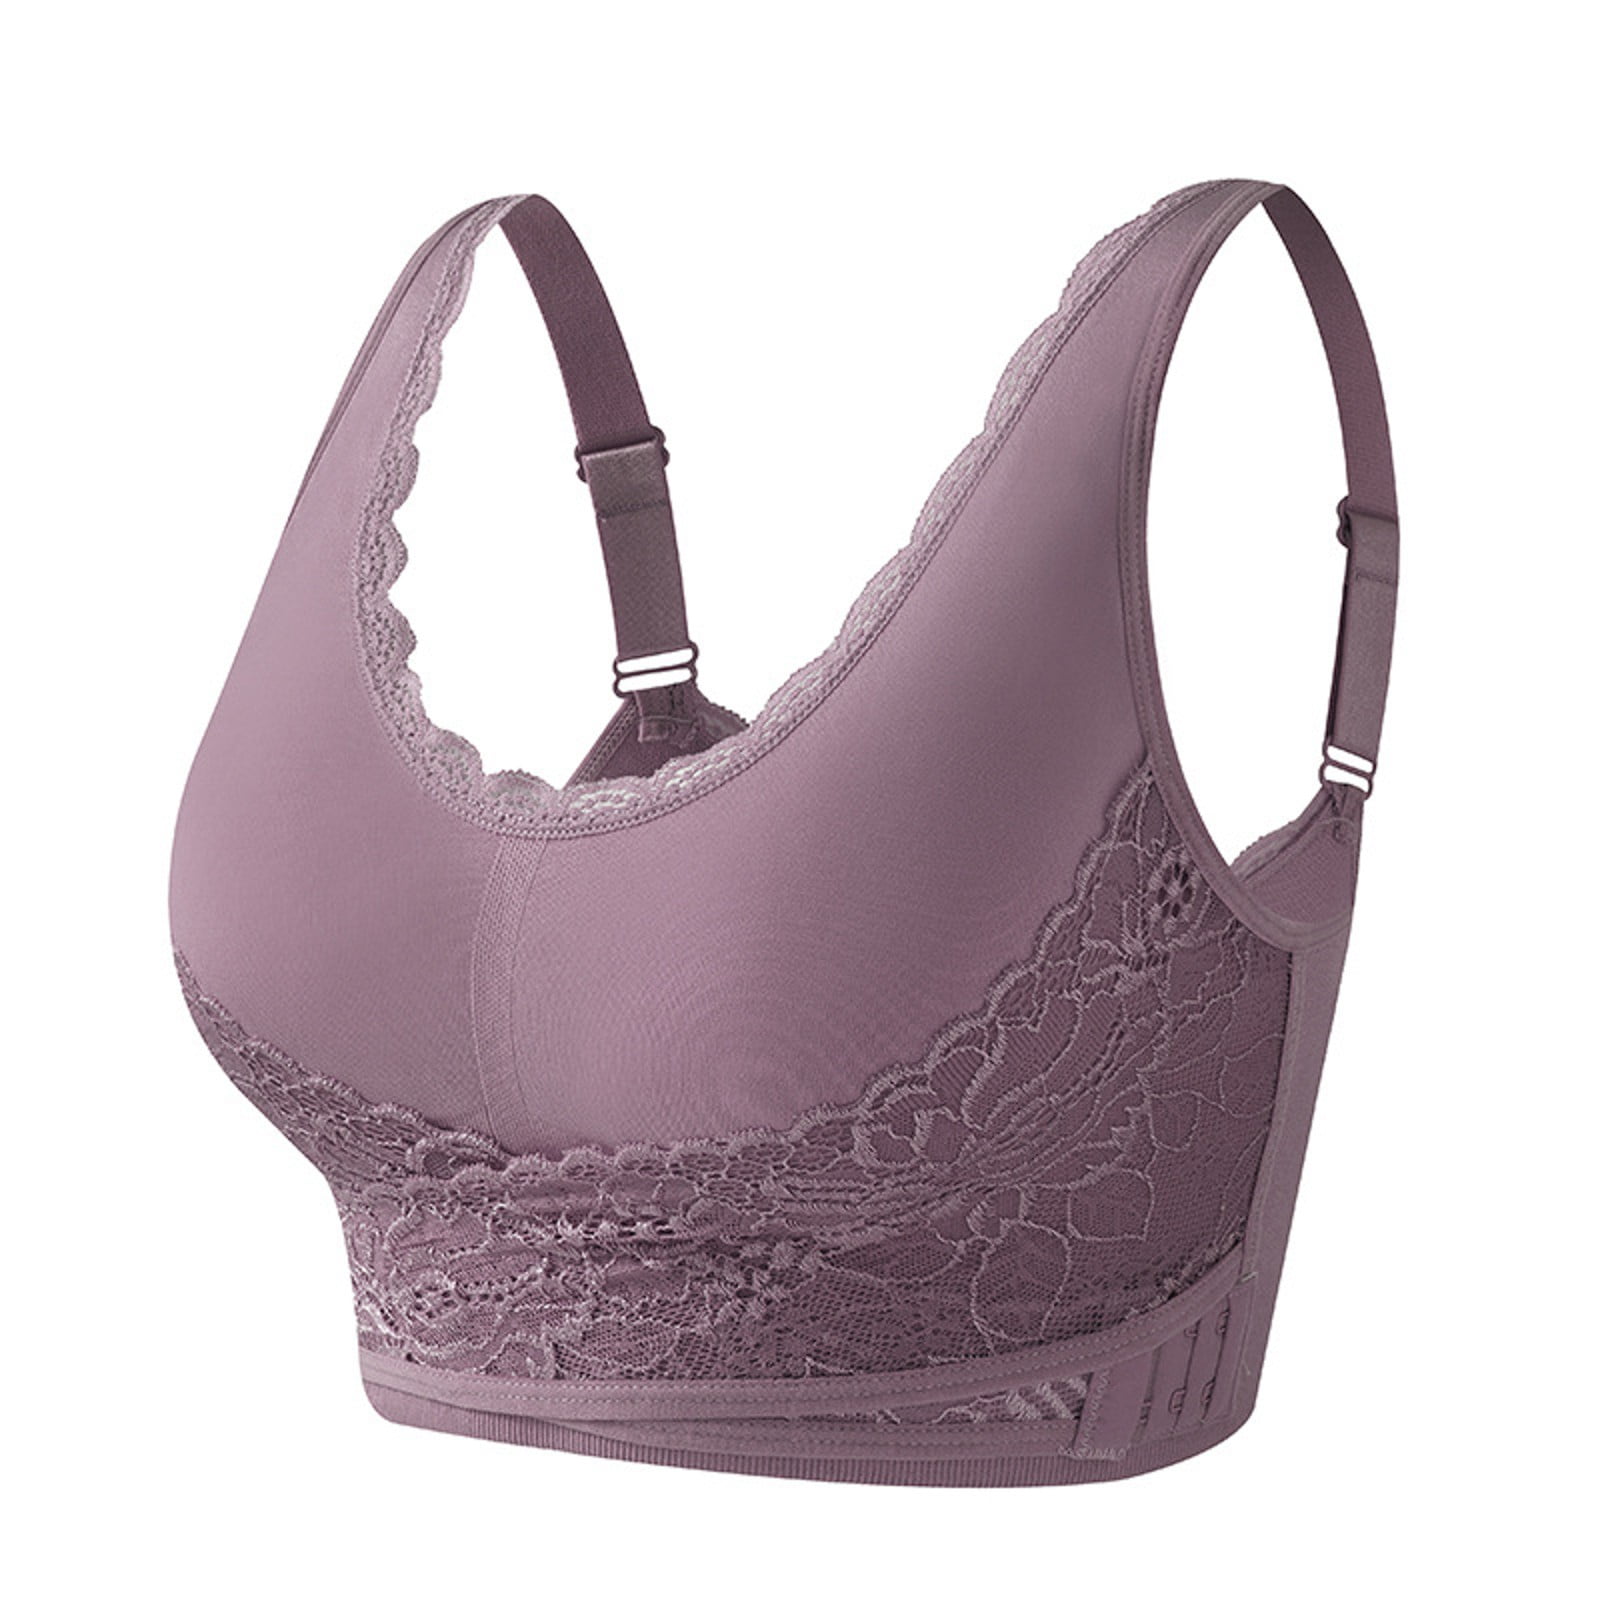 Sports Bra for Women with Sewn-in Pads, High Impact Support with